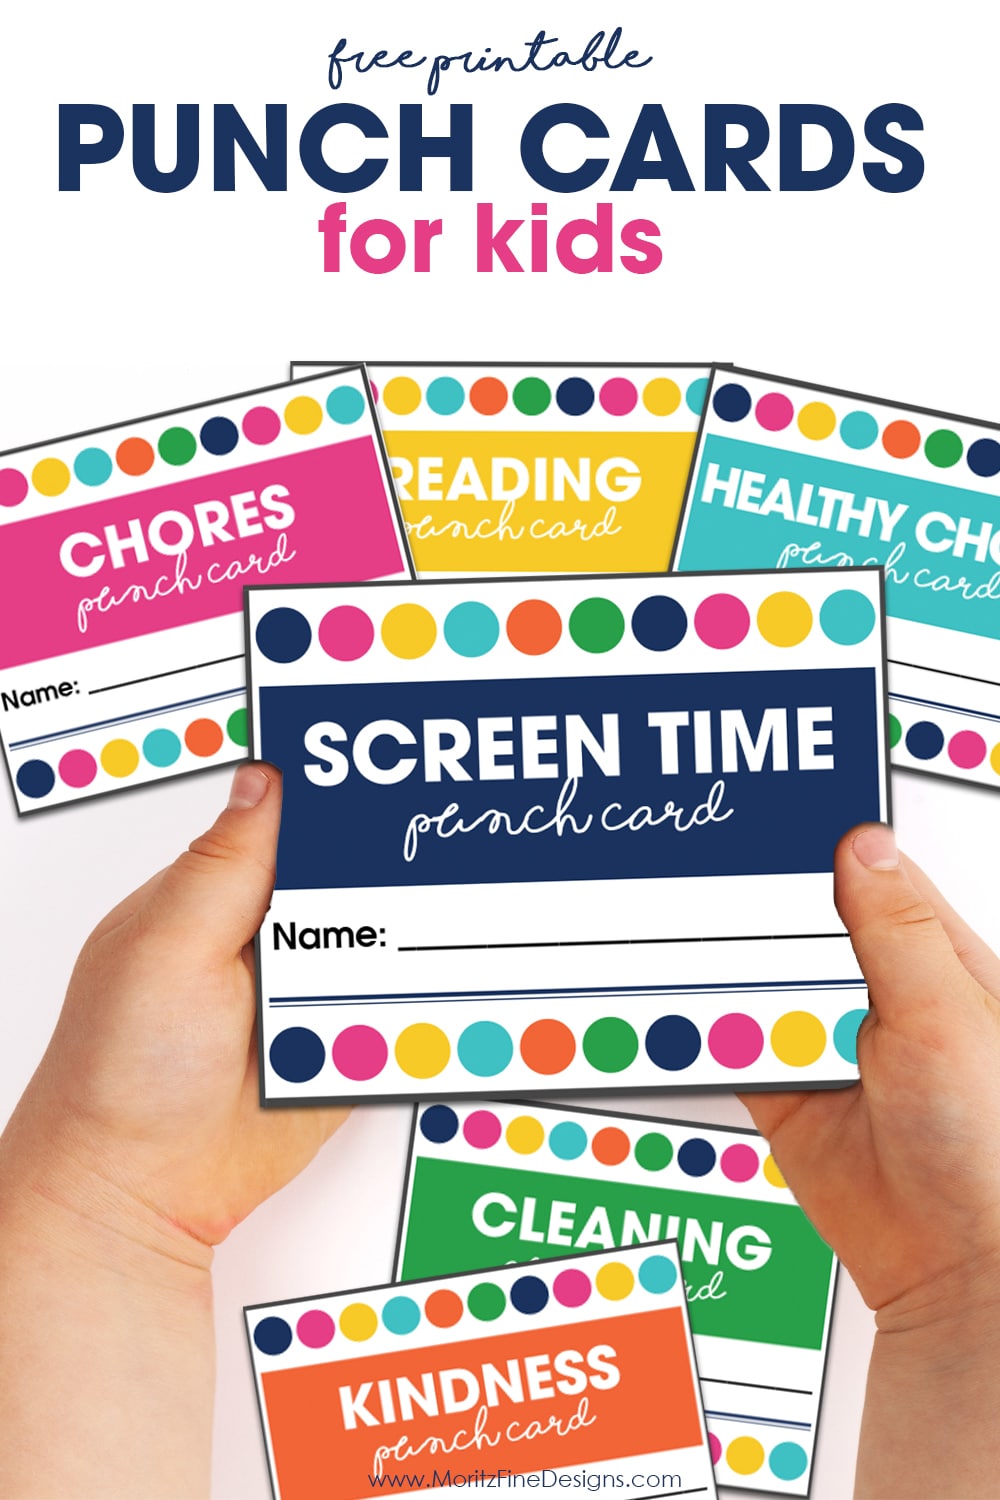 Get your kids motivated to do chores, make healthy choices, earn their screen time and more by using these free printable Punch Cards for Kids.